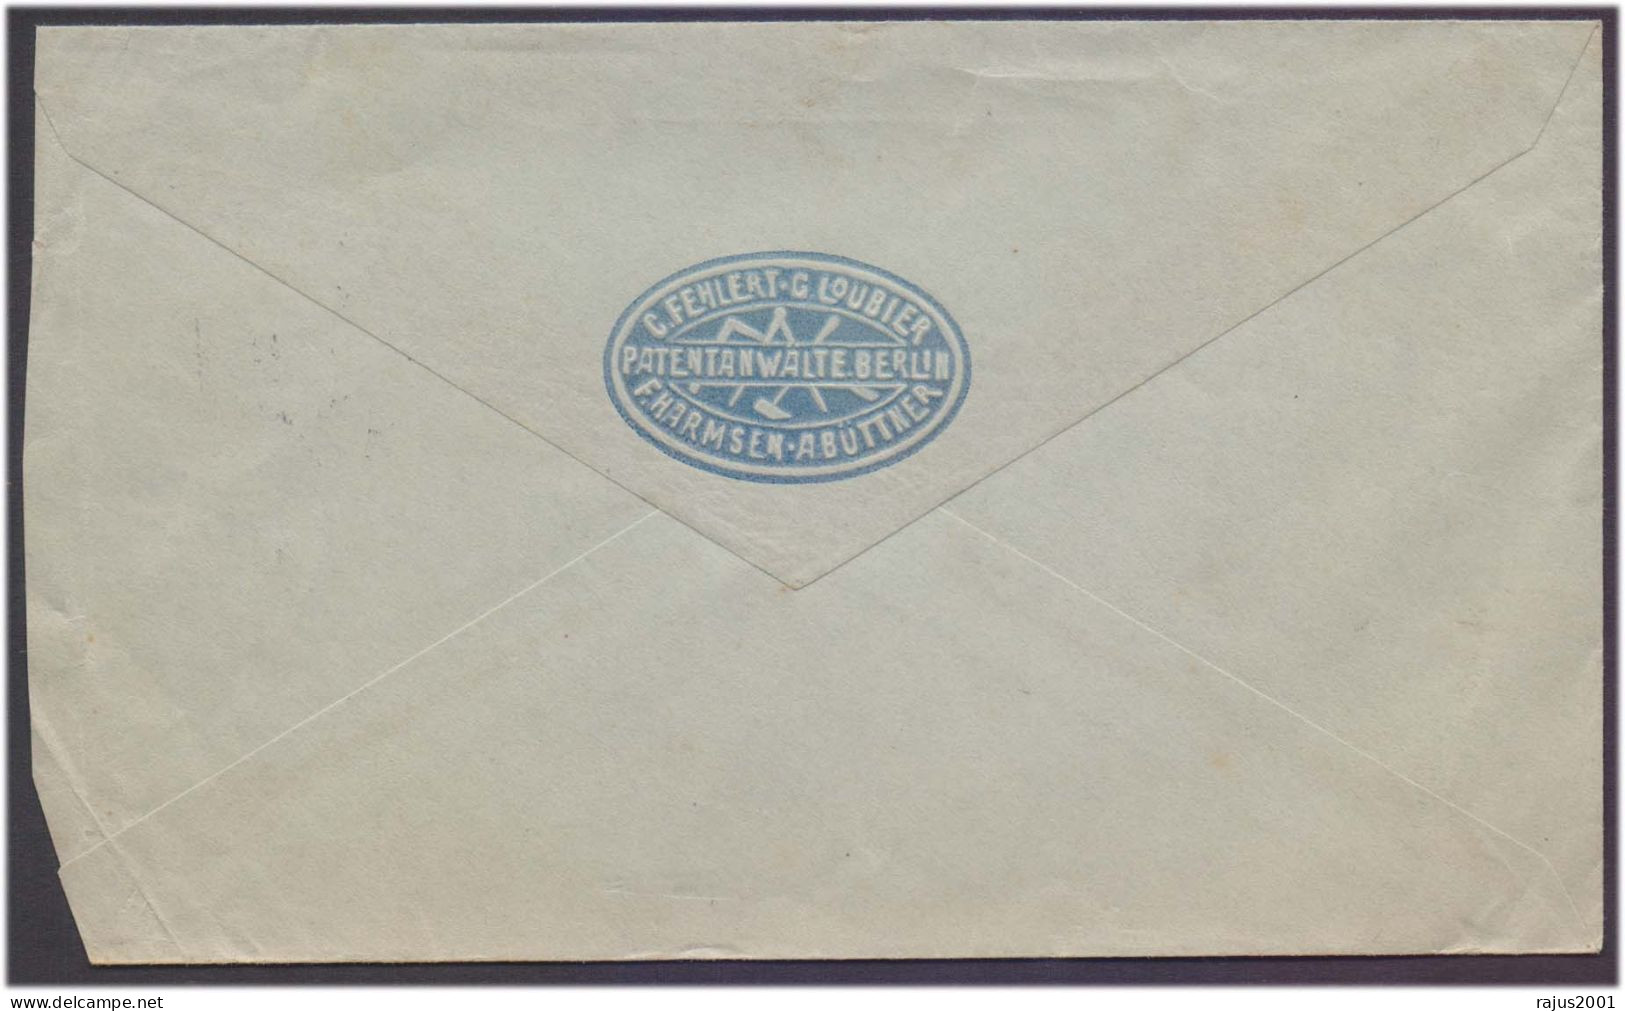 Deutsches Reich Berlin 1906, Received Cyrus Kehr  Germany Postal Stationery Cover - Buste